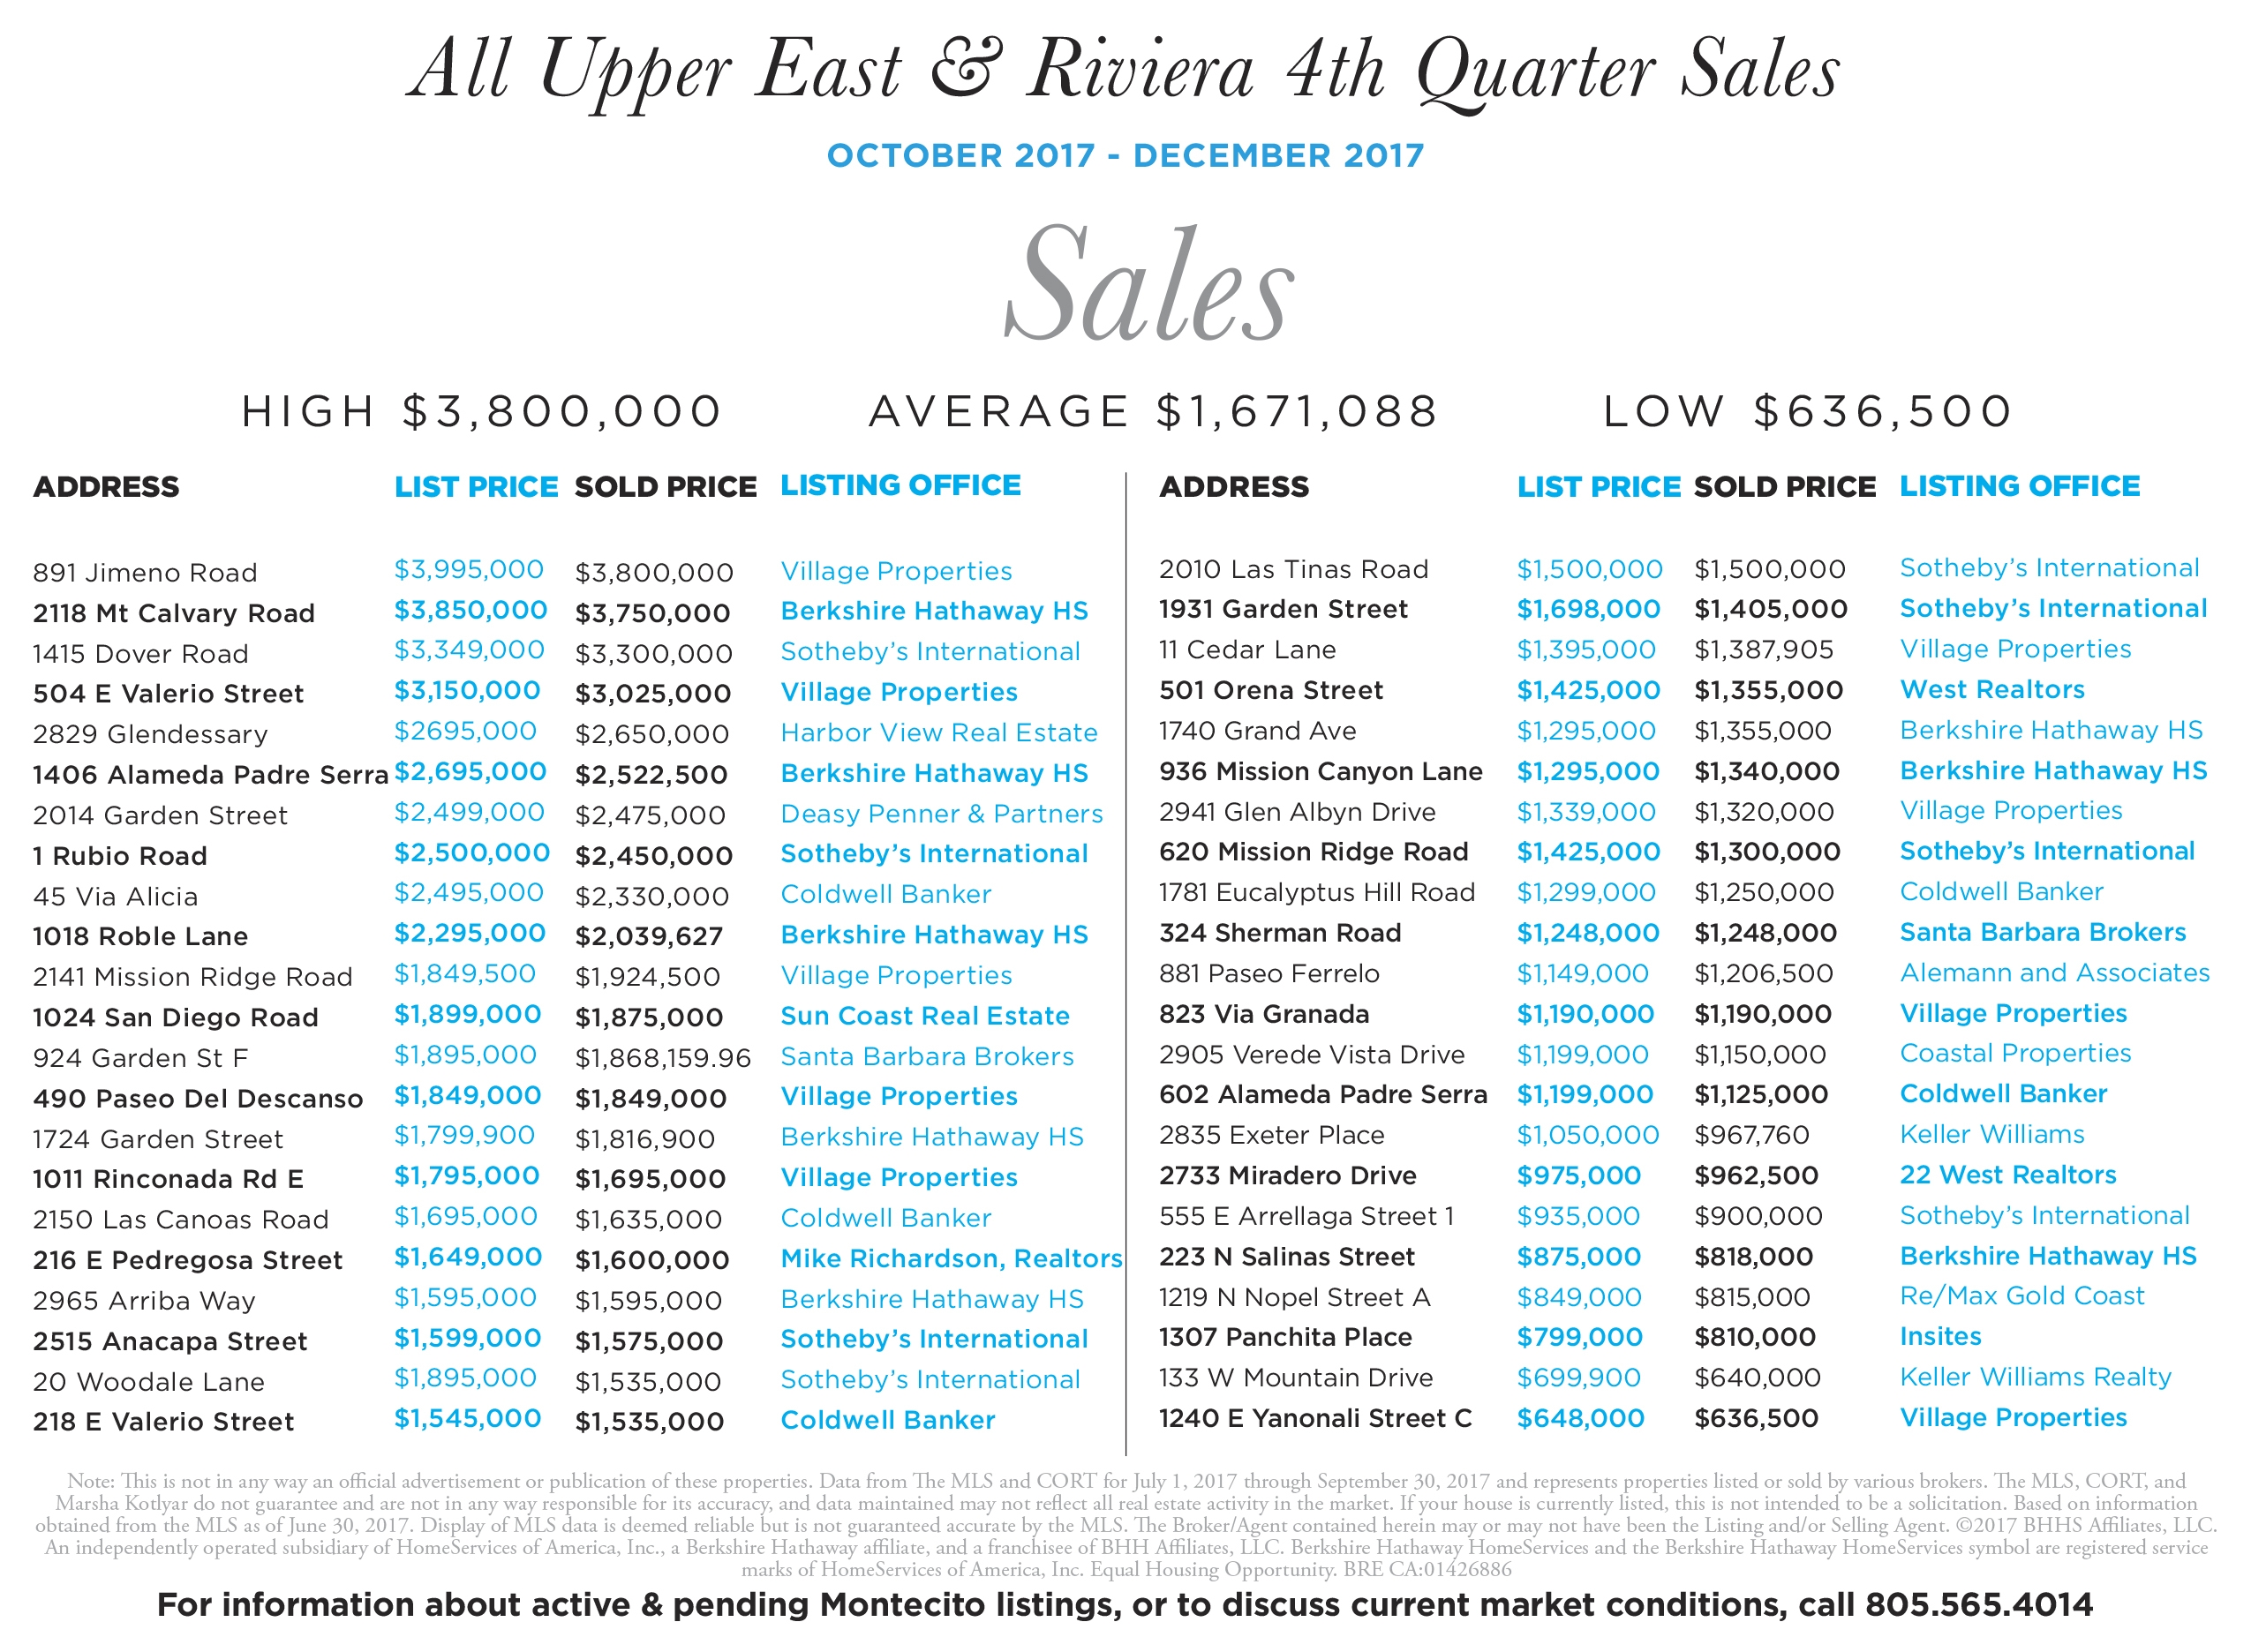 Upper East and Riviera 4th quarter sales